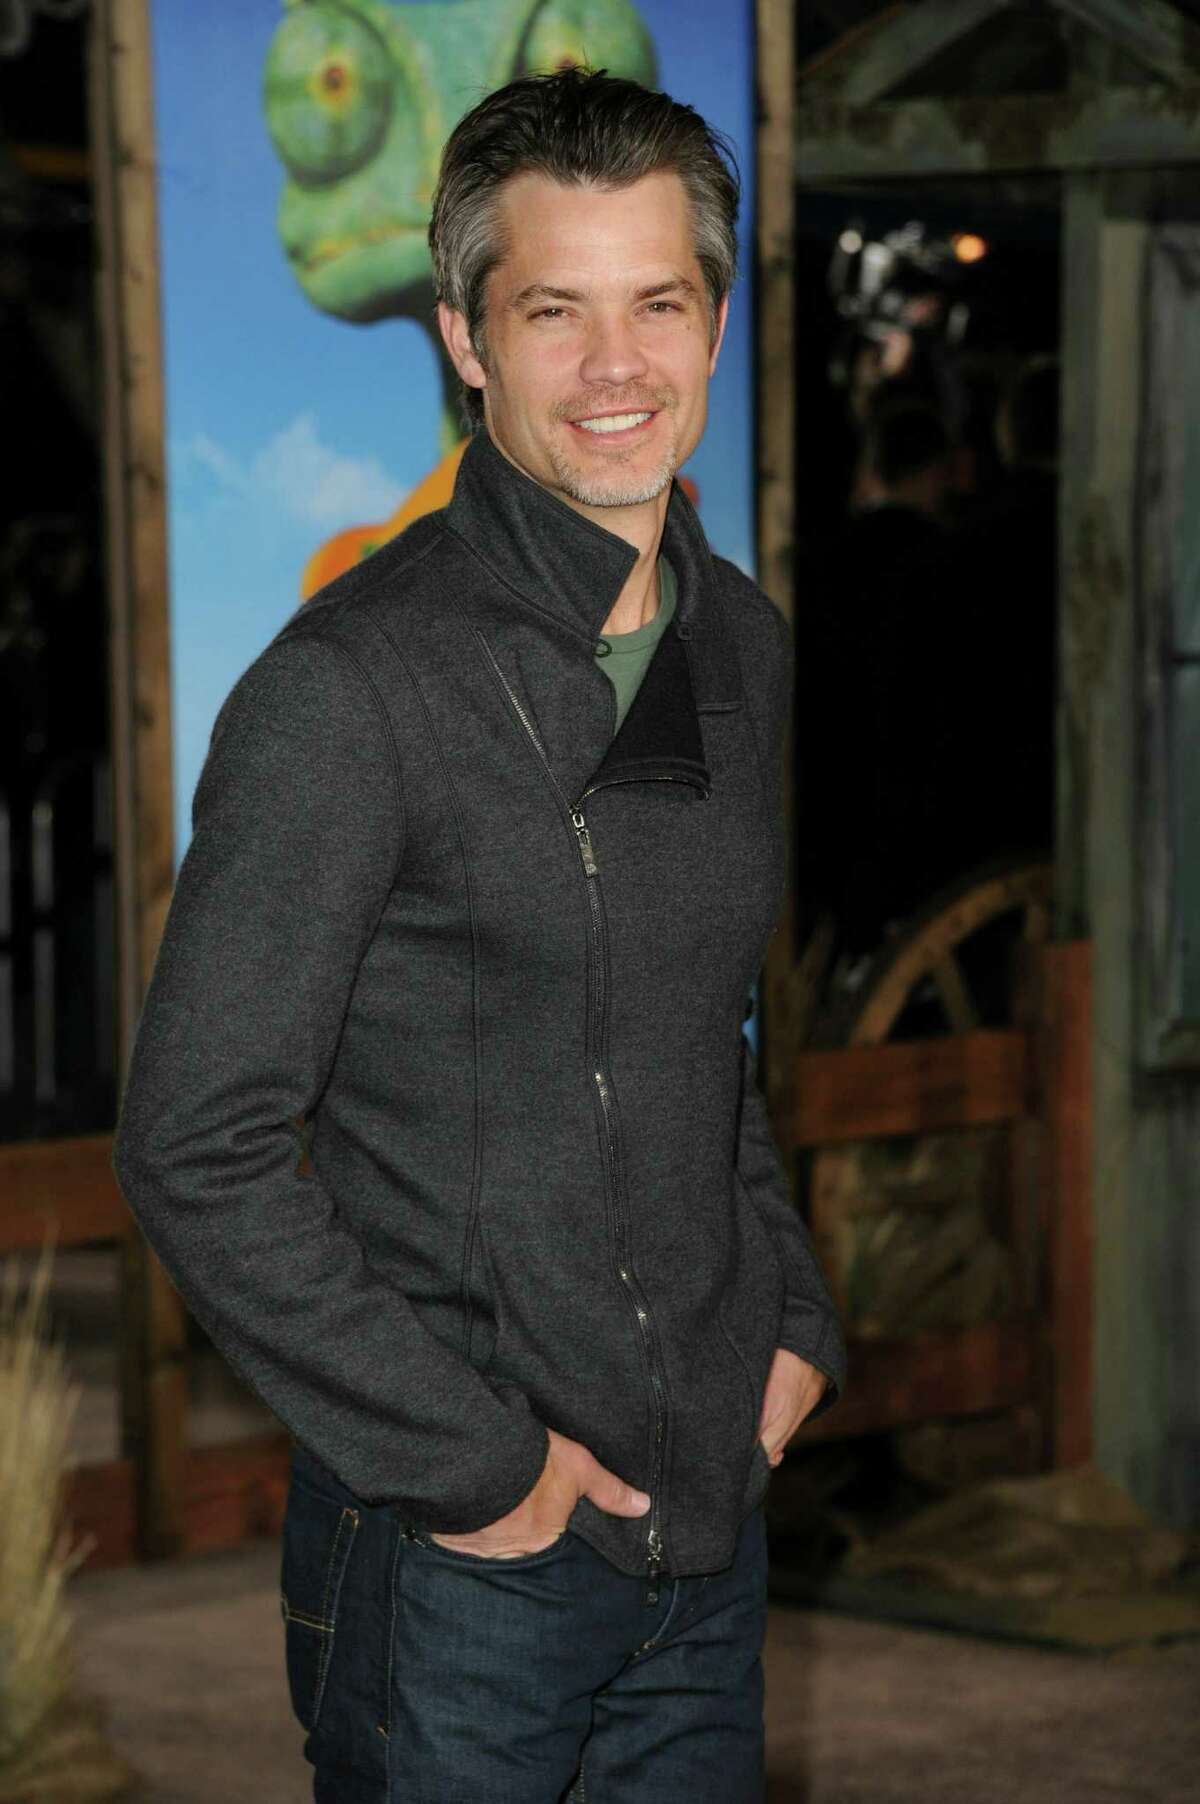 LOS ANGELES, CA - FEBRUARY 14: Actor Timothy Olyphant arrives at the premiere of Paramount Pictures' "Rango" at Regency Village Theater on February 14, 2011 in Los Angeles, California. (Photo by Jason Merritt/Getty Images)